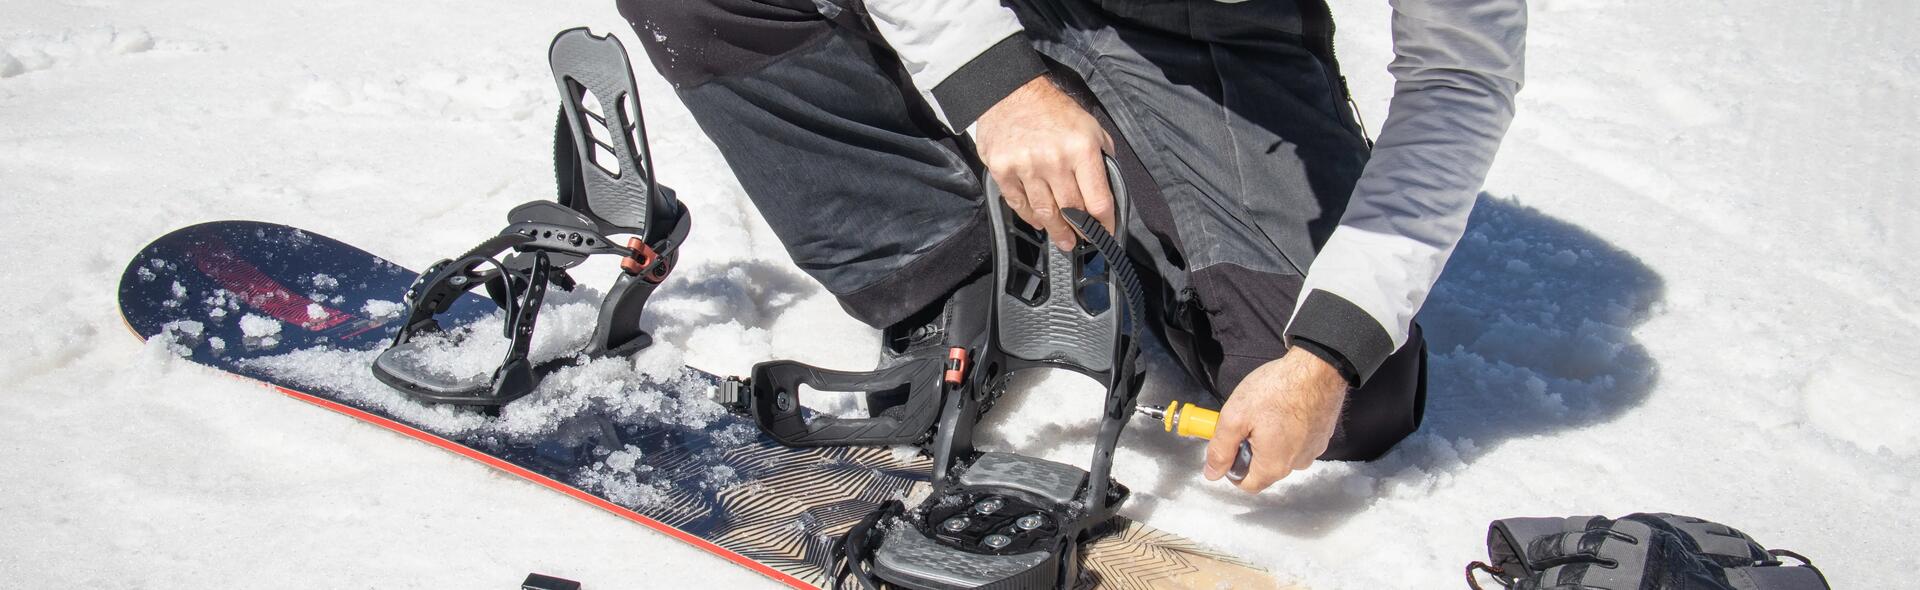 How to adjust your snowboard bindings - title